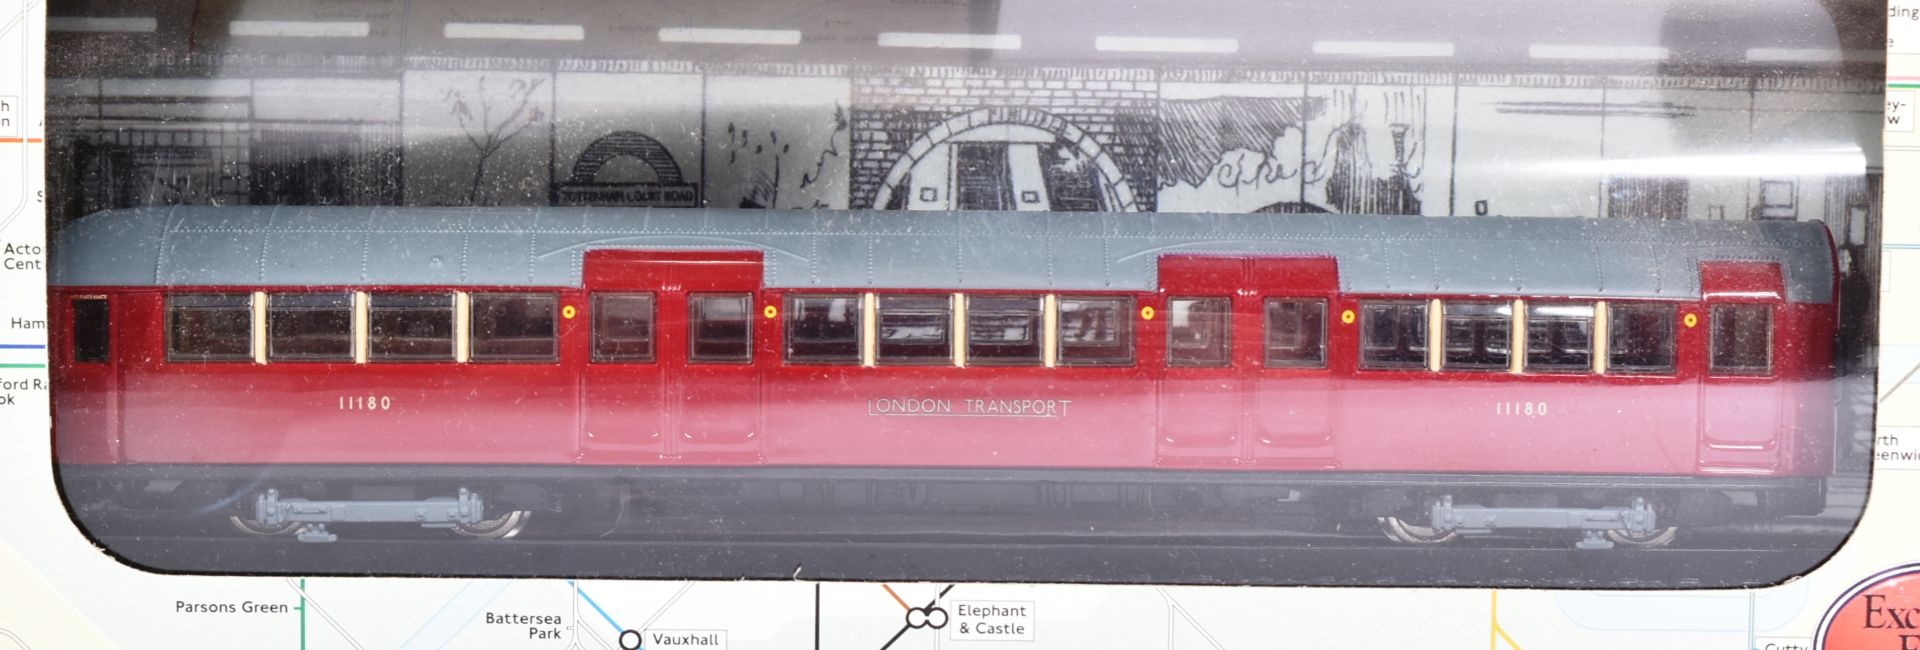 THREE GILBOW LONDON TUBE STOCK CARRIAGES MODEL DIECAST 1/76 SCALE - Image 4 of 5